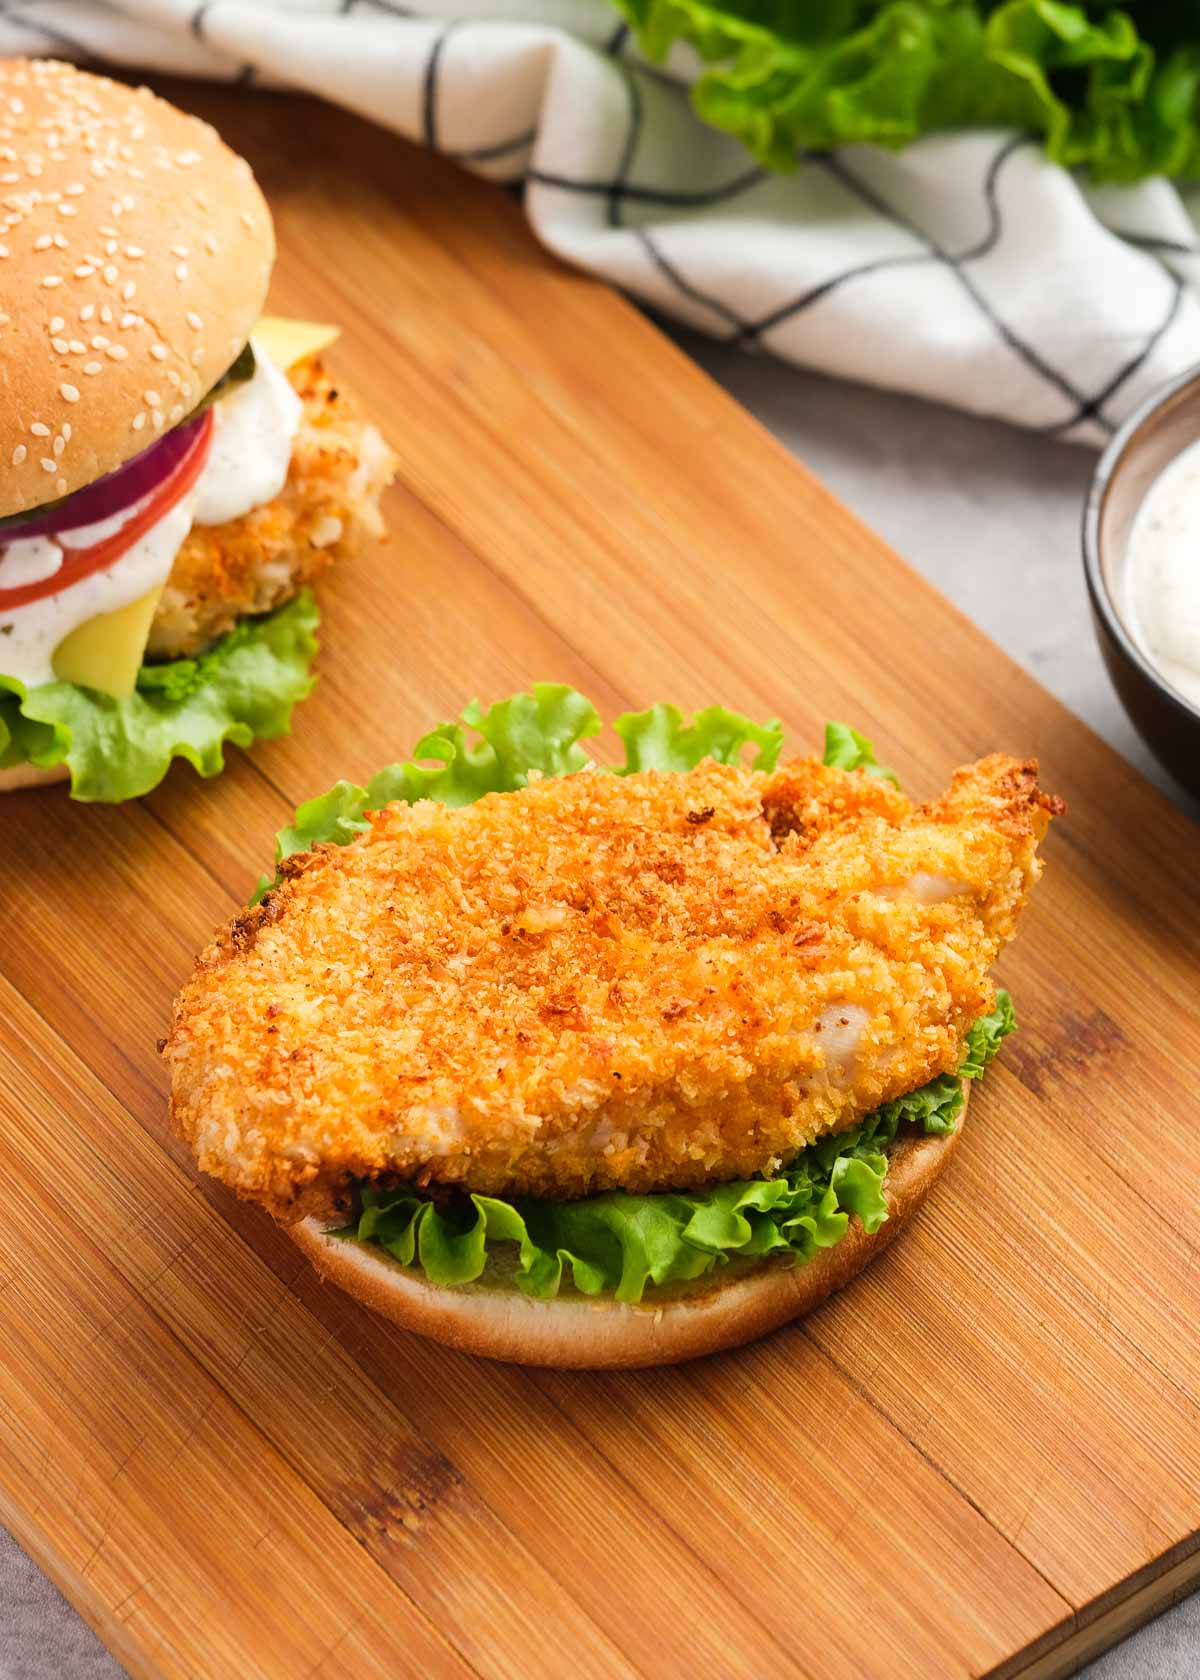 a crispy chicken fillet lying on a bed of lettuce and bun, waiting for other chicken sandwich toppings.